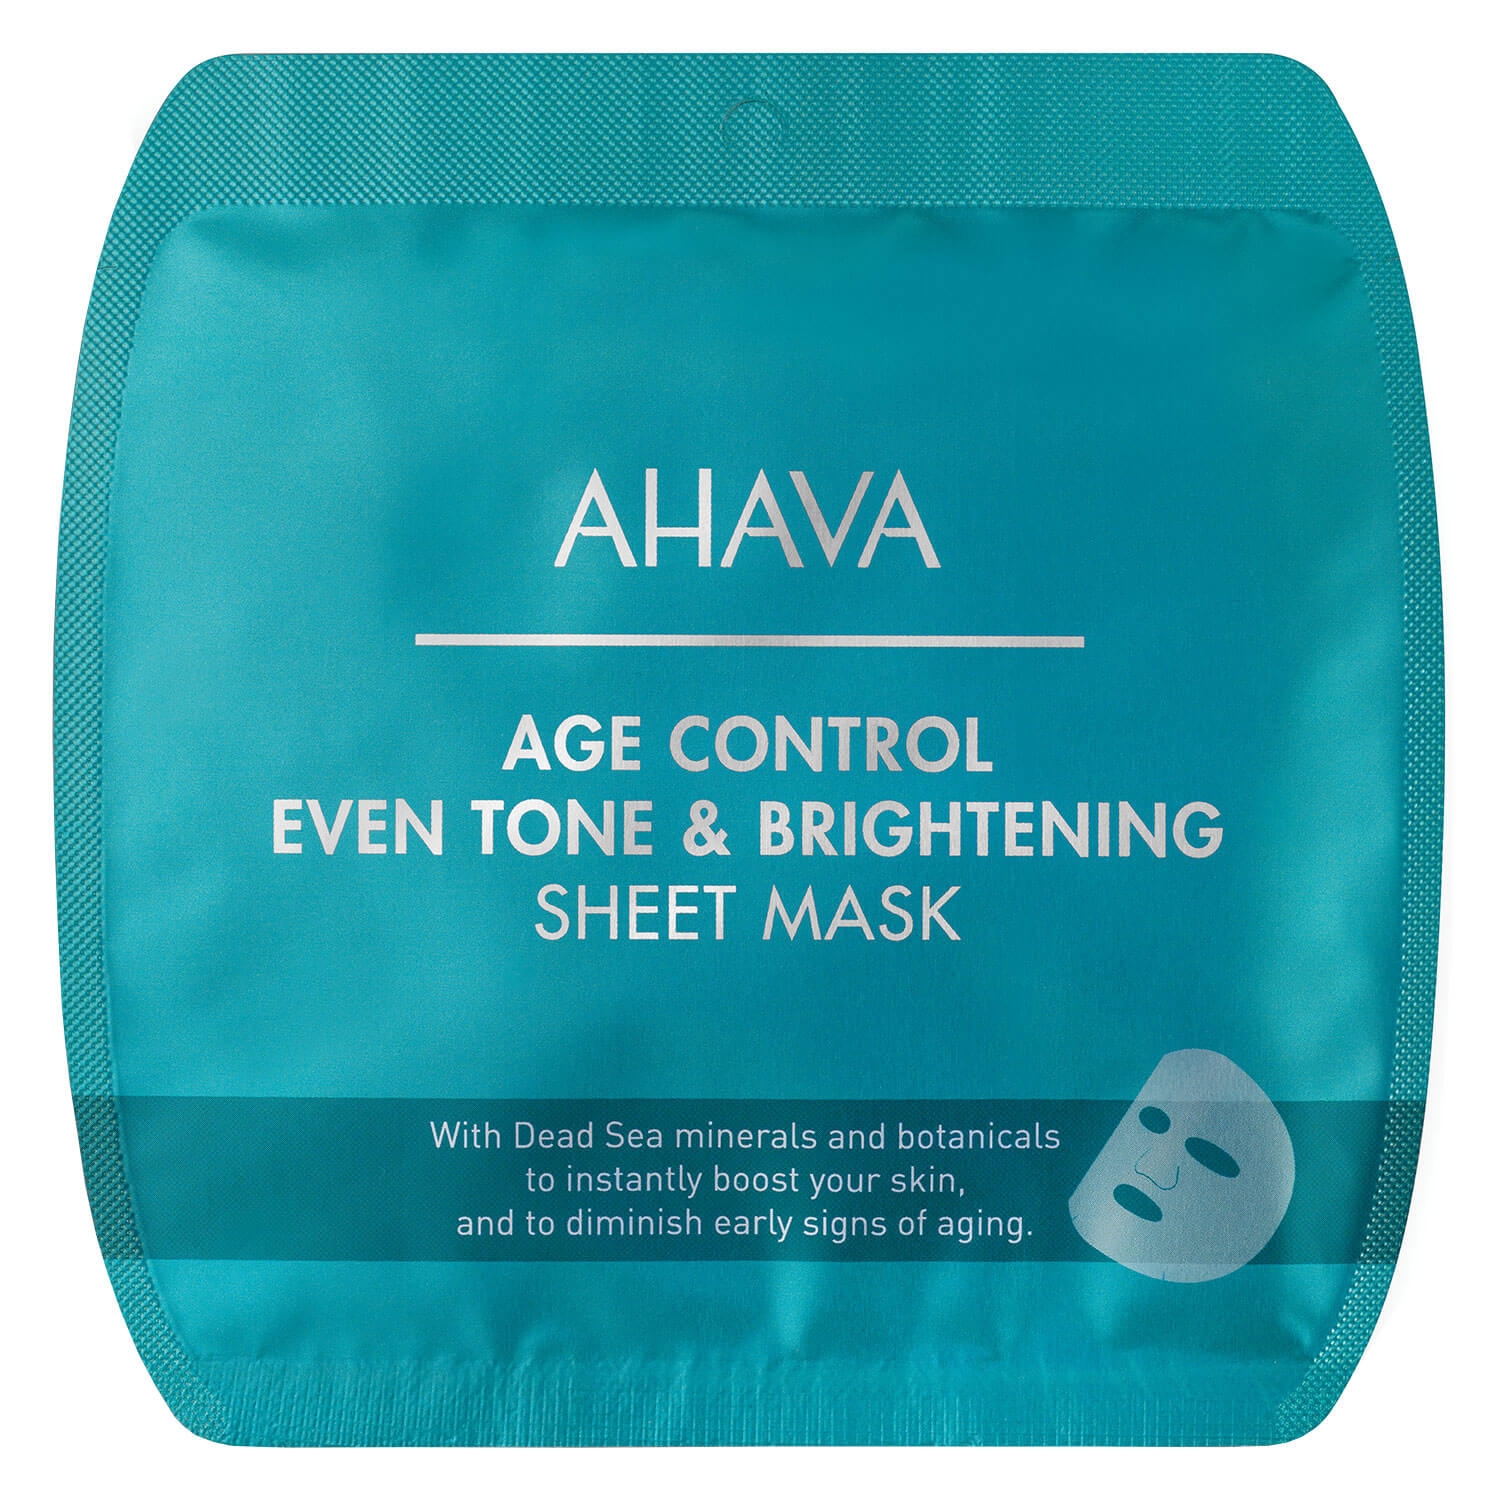 Product image from DeadSea Minerals - Age Control Even Tone & Brightening Sheet Mask